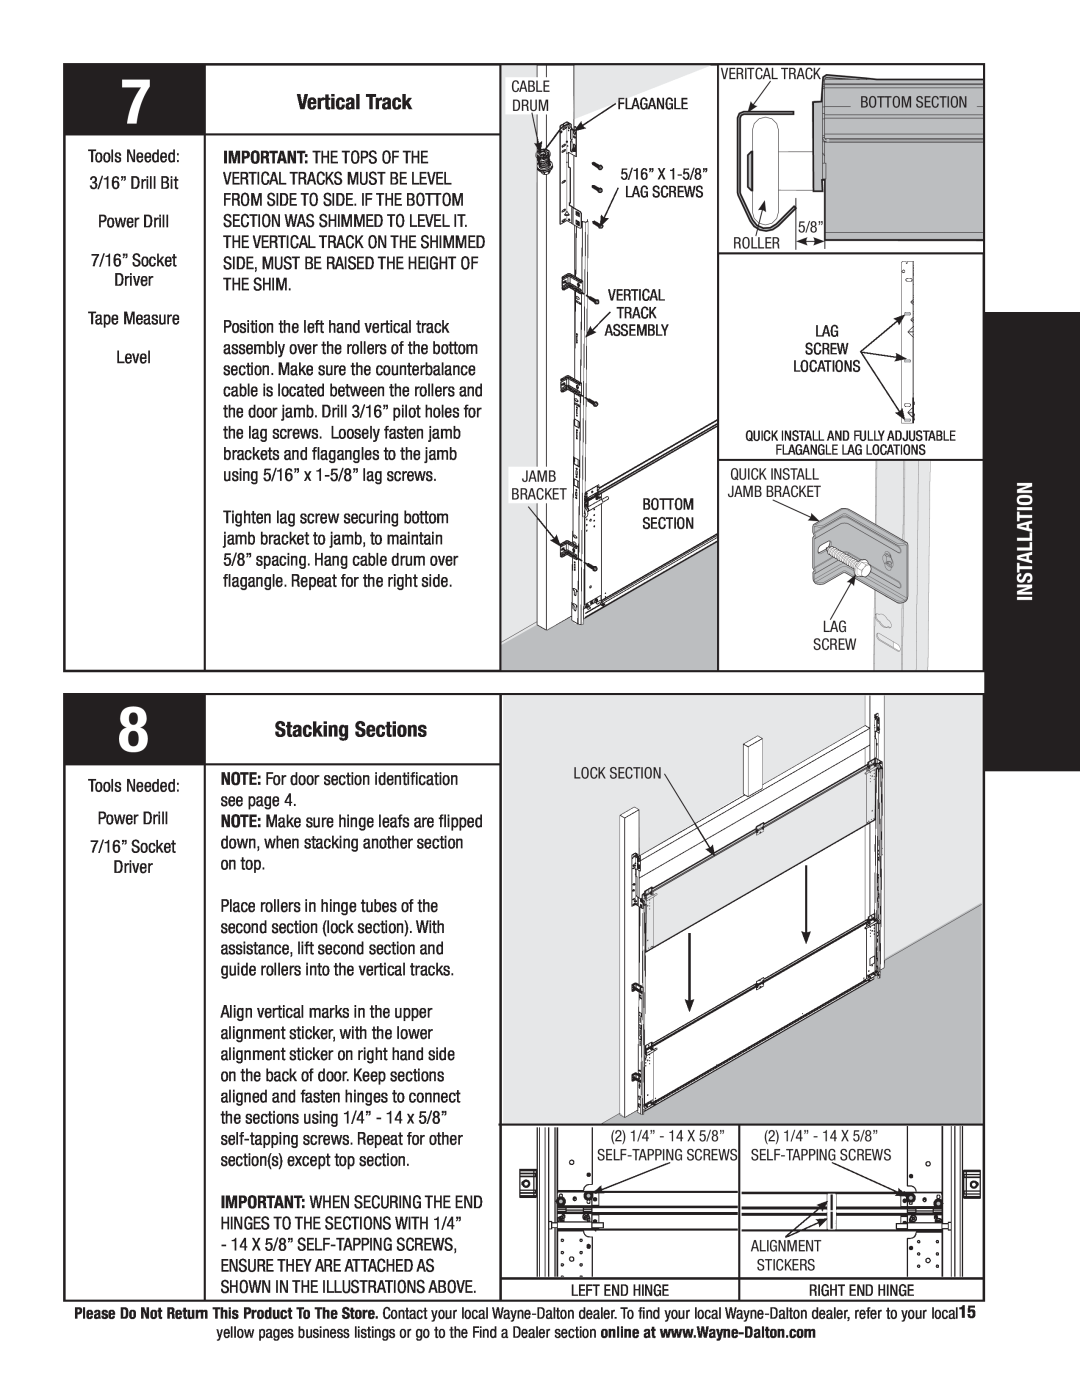 Wayne-Dalton 9800 installation instructions Vertical Track, Stacking Sections, Installation 